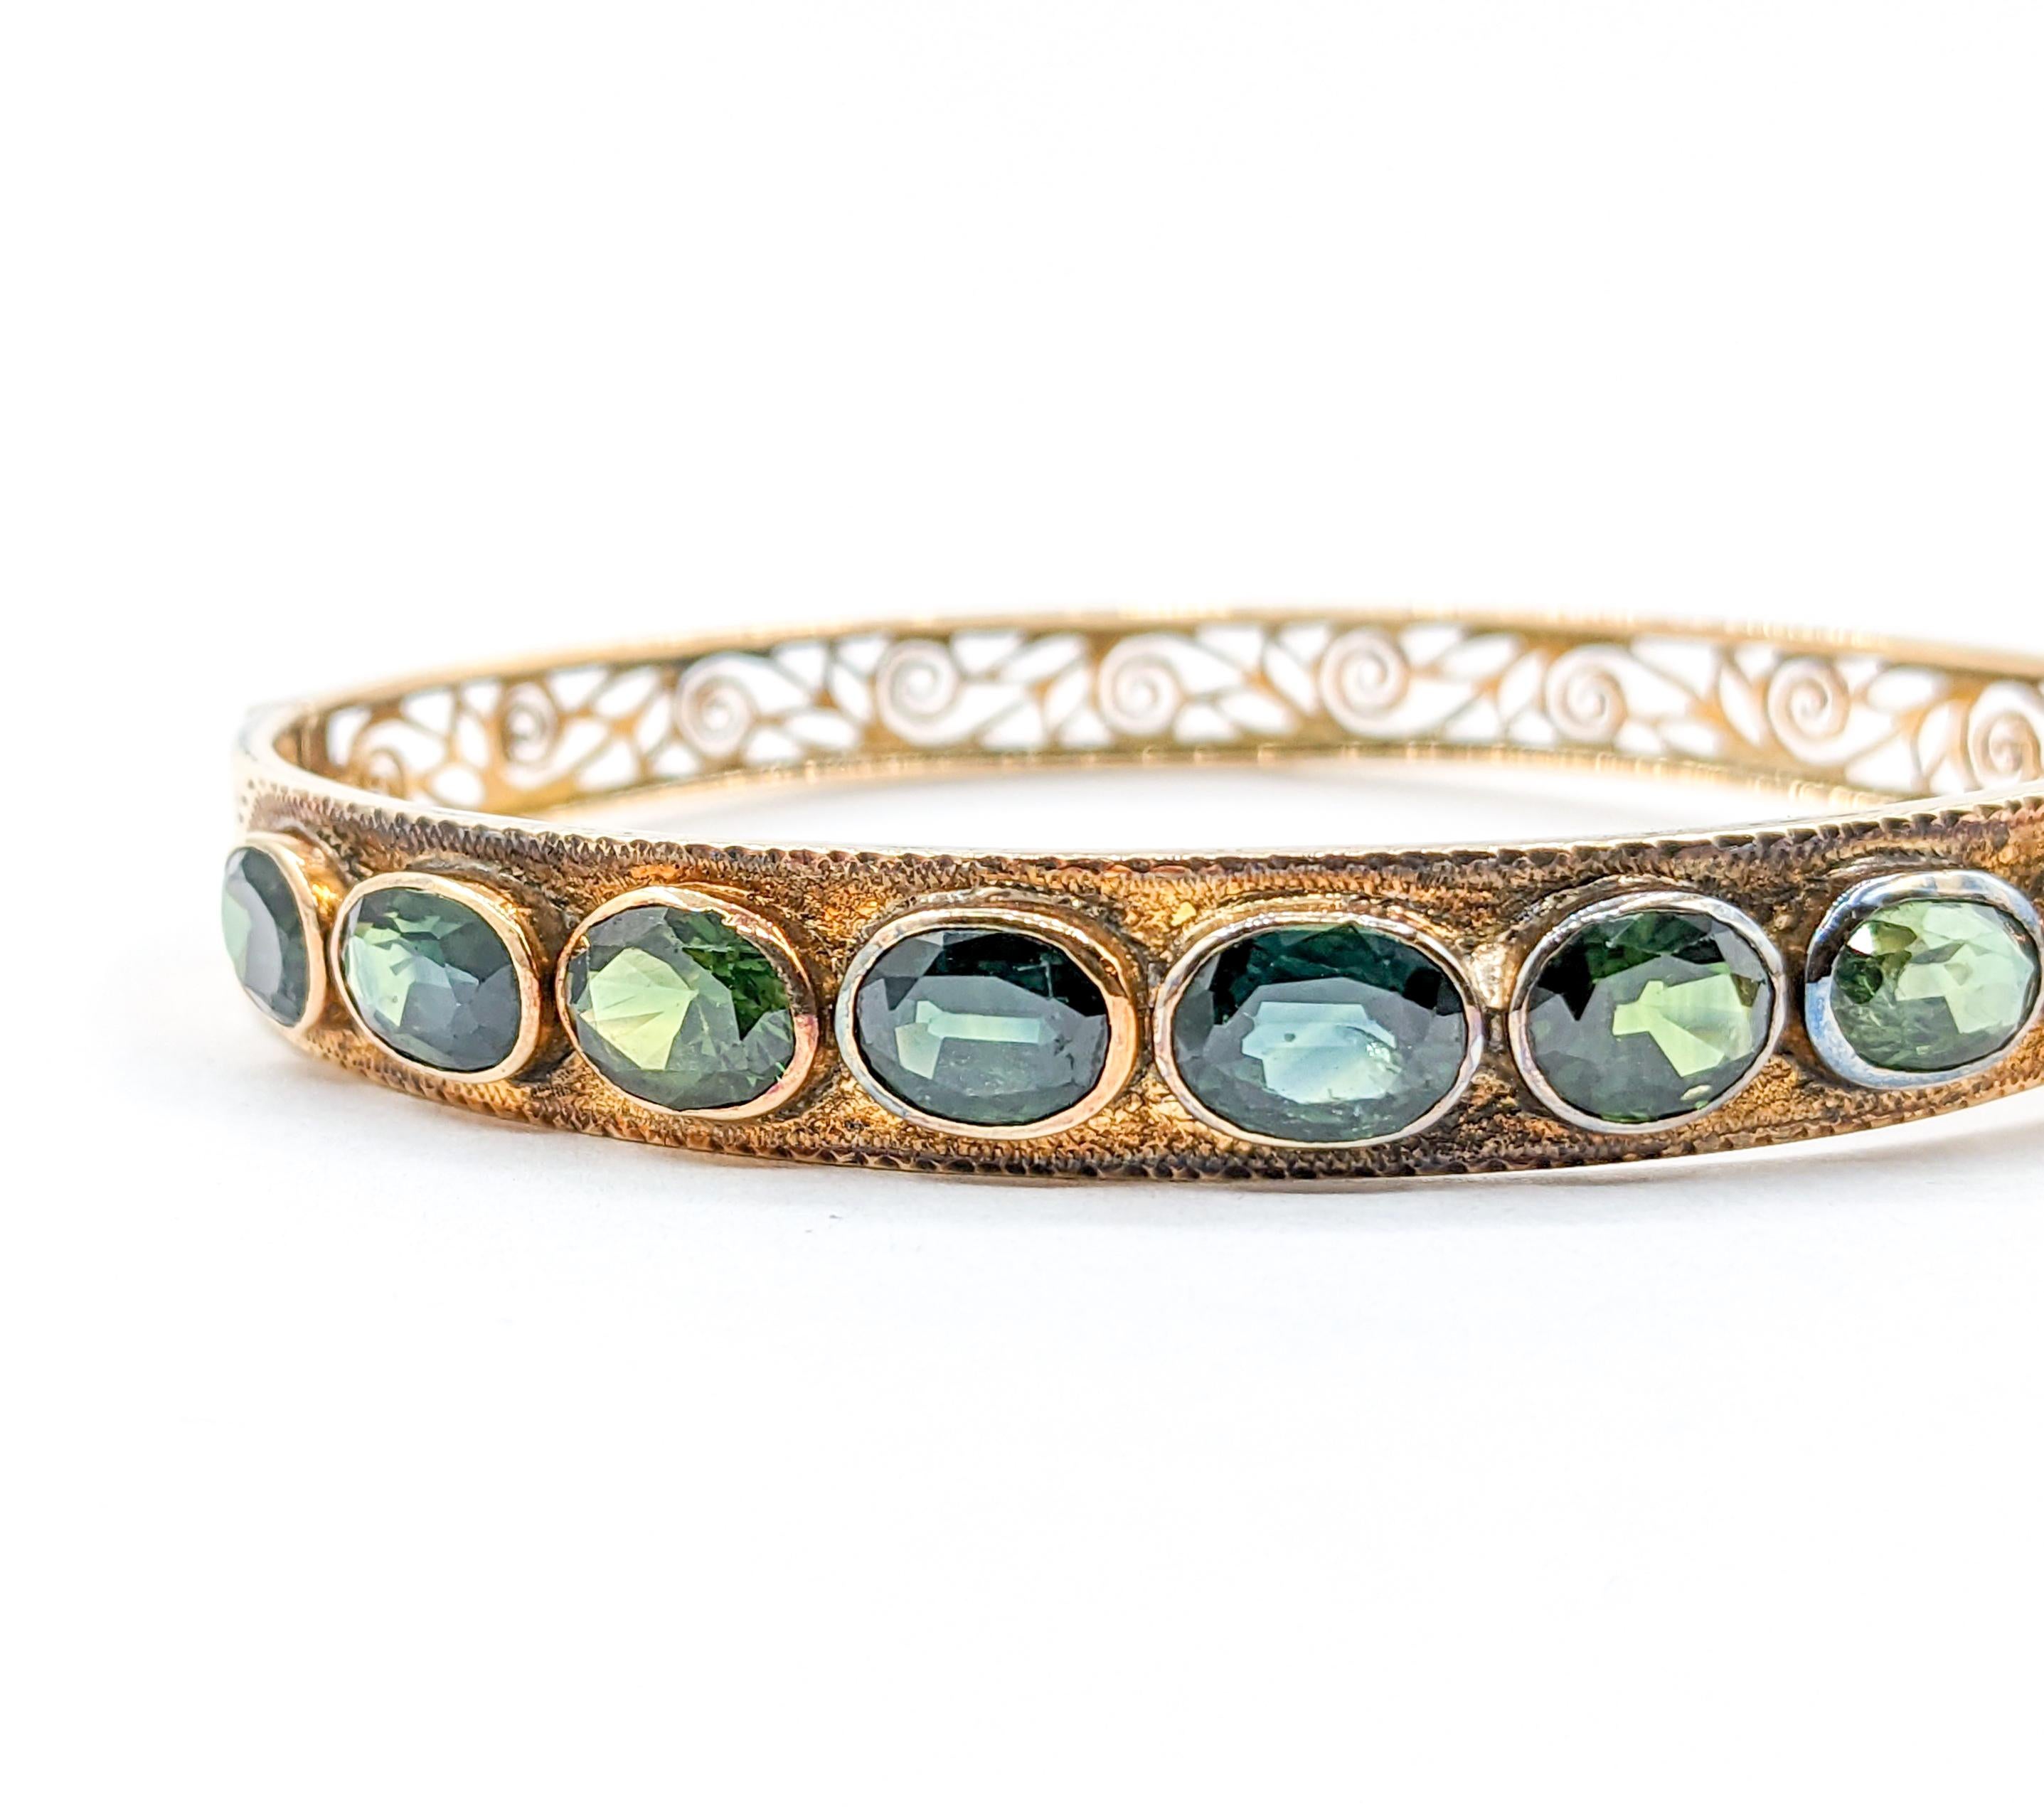 Fabulous 18k 10.1ctw Oval Teal Sapphire Bangle Bracelet

Introducing this stunning vintage sapphire bracelet, a masterful creation in the world of fine jewelry. Fashioned in exquisite 18k yellow gold, it is adorned with an impressive 10.1ctw of oval